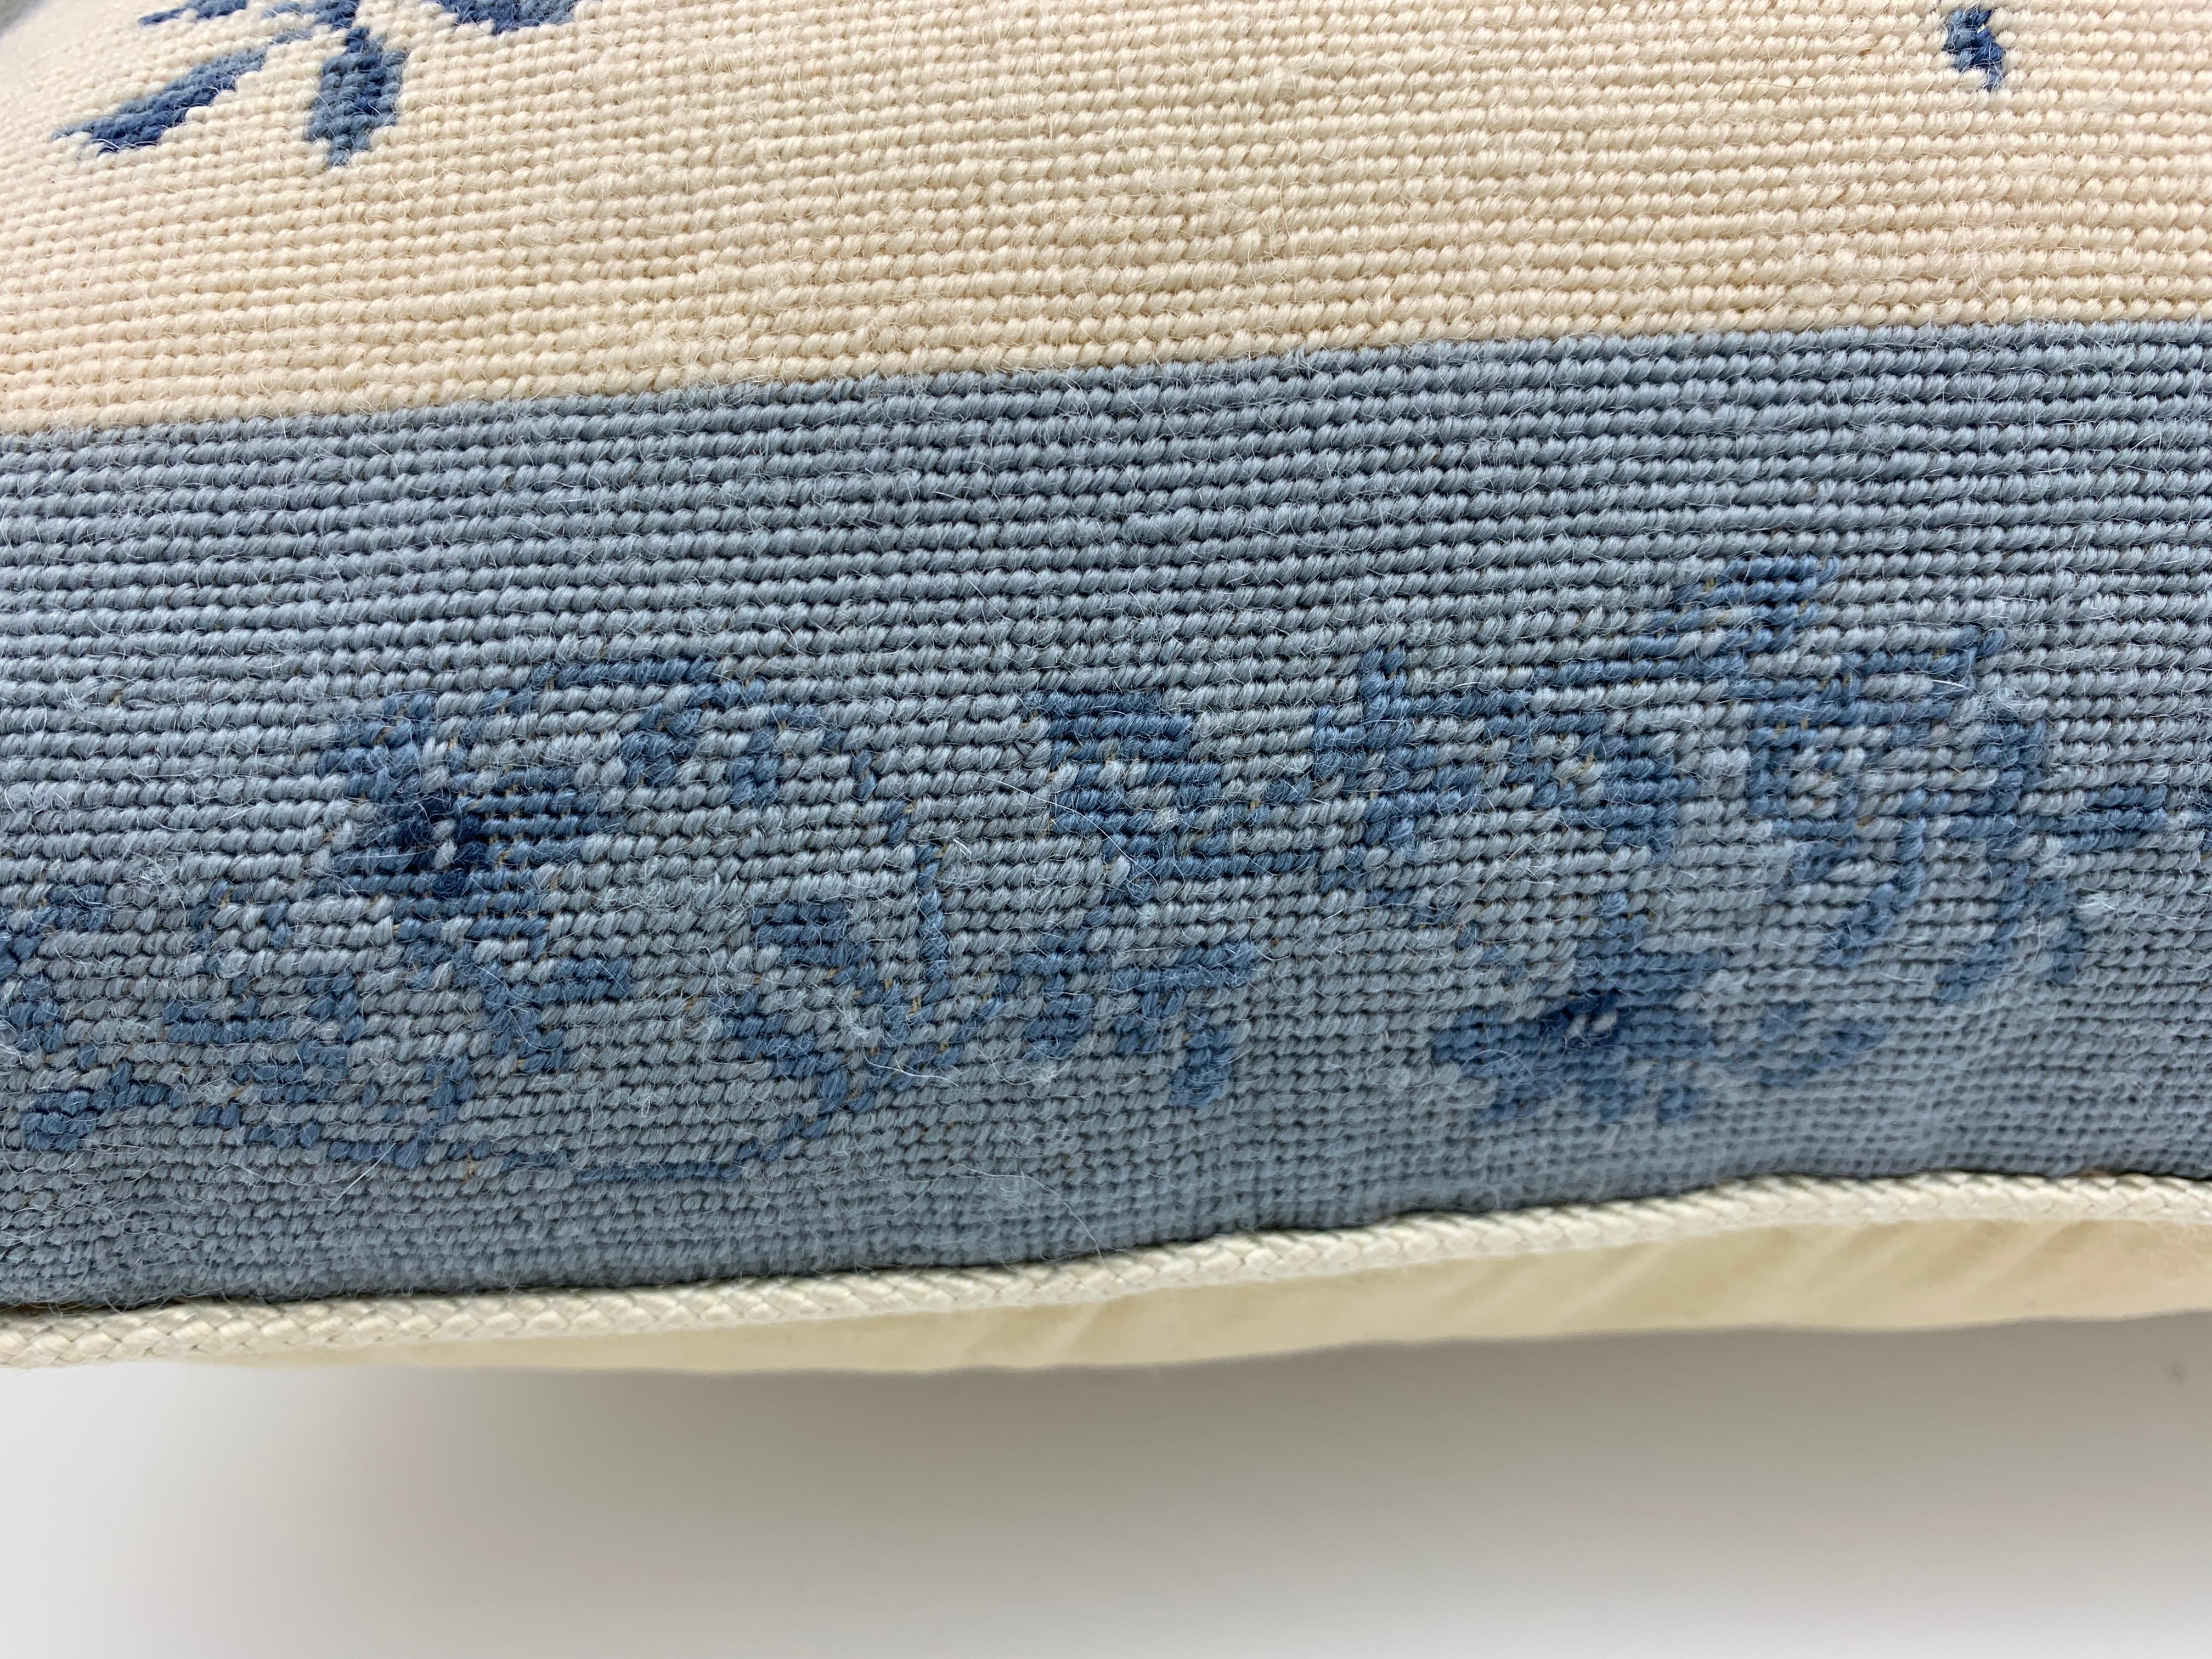 Chinoiserie Blue and White Pagoda Needlepoint Pillow, 1970s For Sale 10